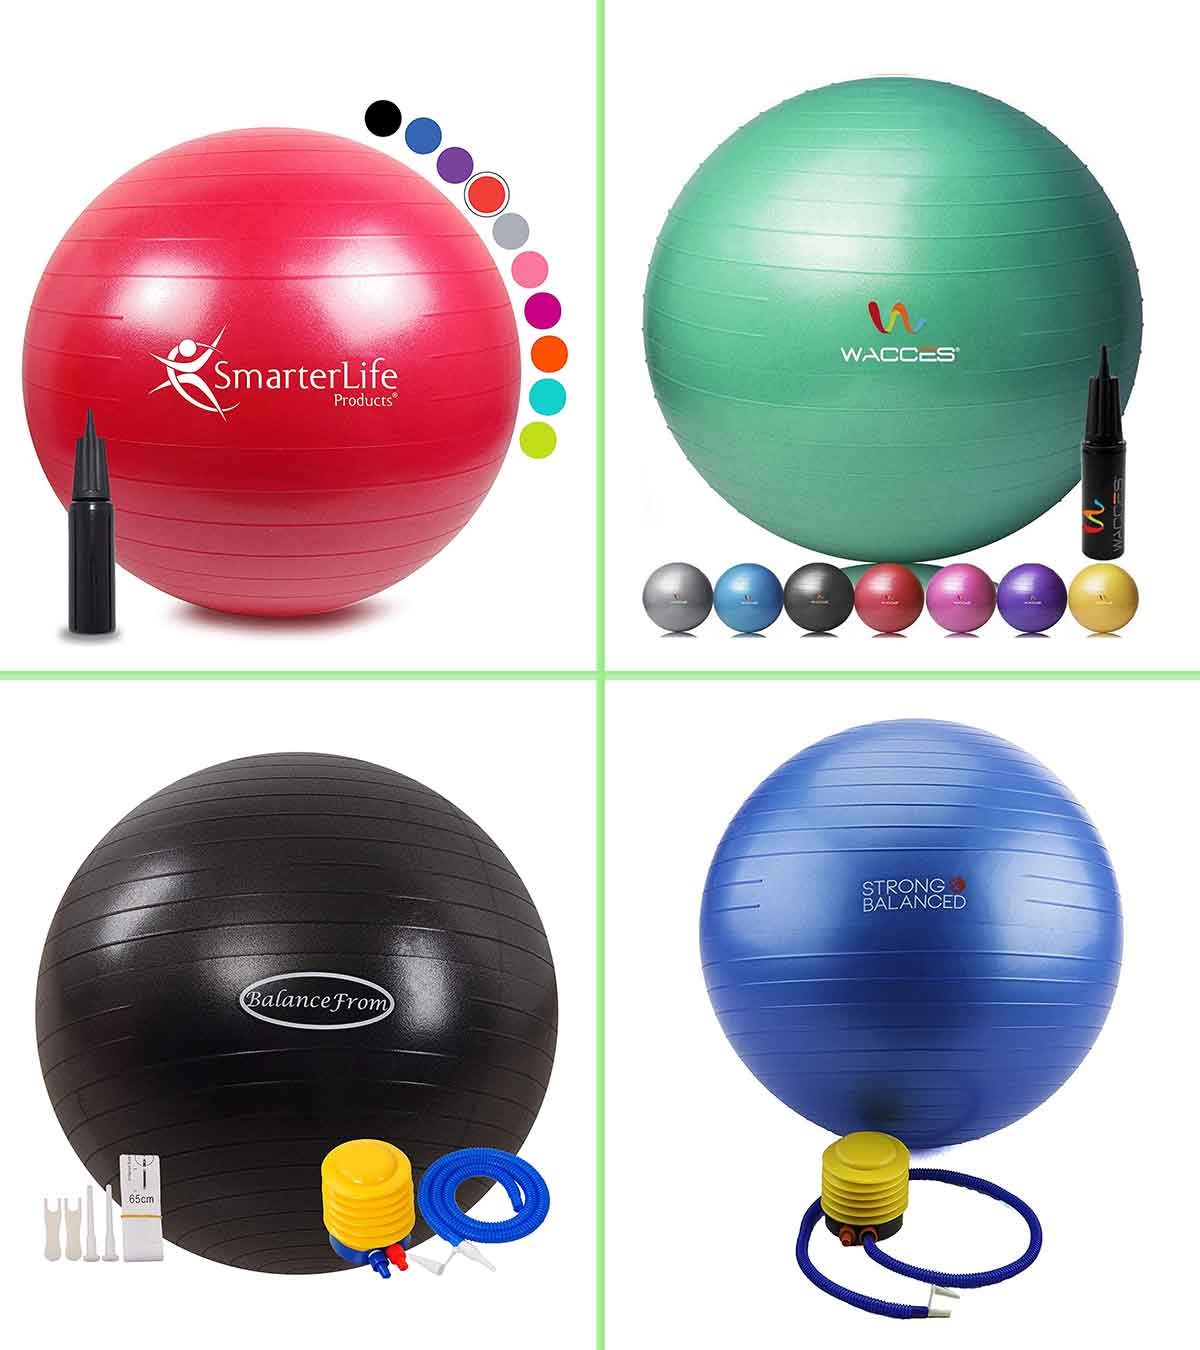 Pregnancy and Recovery Plan Fitness SIYWINA Exercise Ball Birthing Ball Pregnancy Maternity Ball with Quick Pump Anti-Burst Yoga Ball for Pilates 